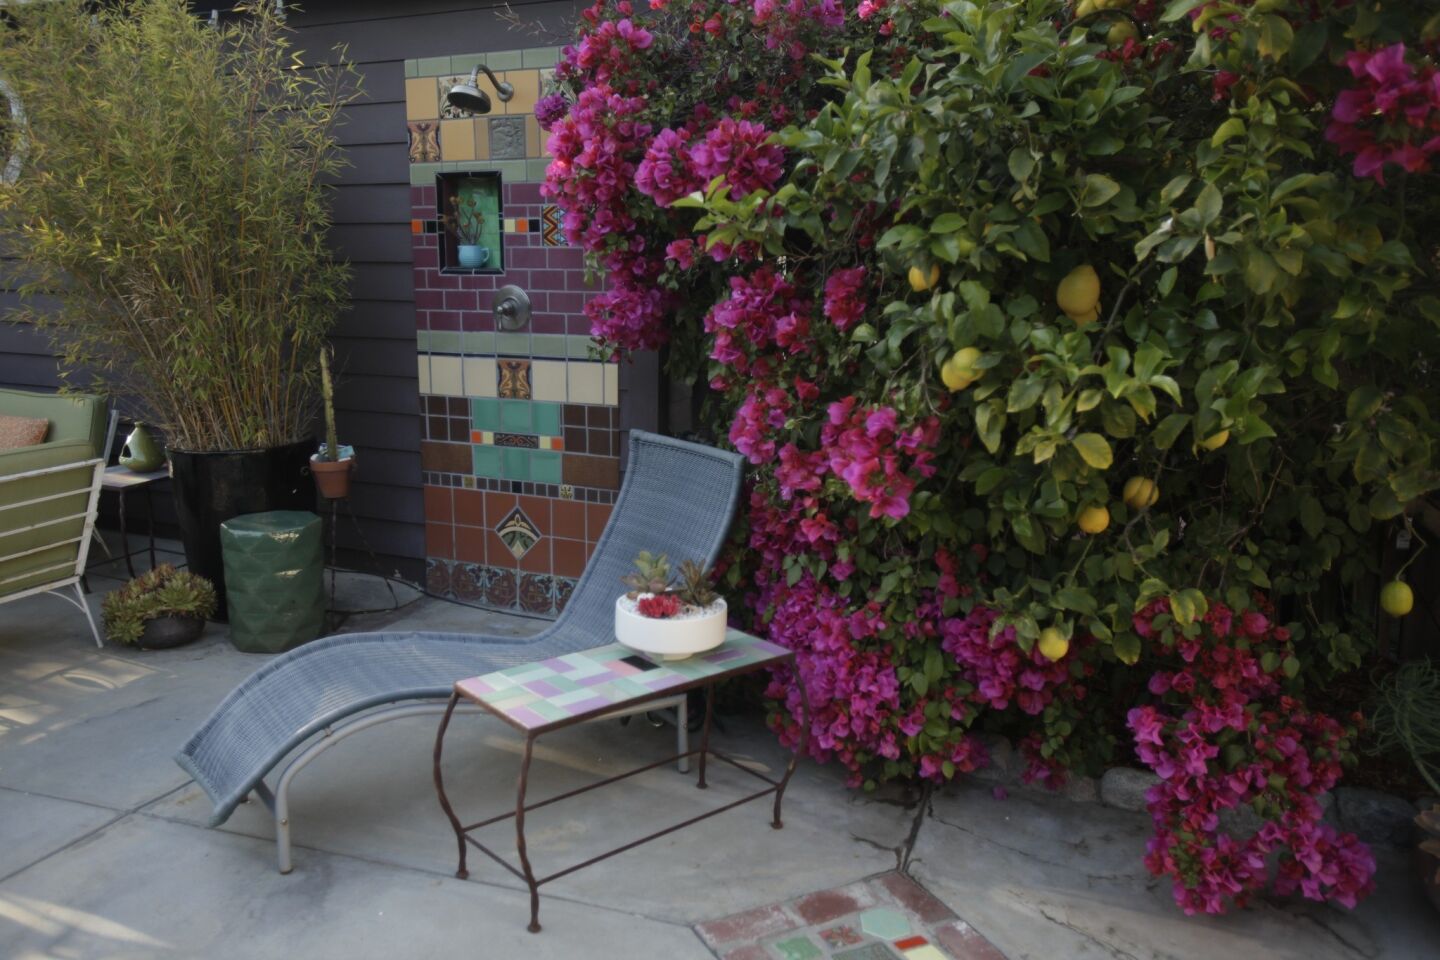 An inexpensive Ikea chaise provides another place to lounge with a good book. Gutierrez initially had the pink bouganvillea in a pot and has moved it to two different houses. The lemon tree also has grown since being transplanted from a 1-gallon pot. "I love my lemon tree," Gutierrez said. "I think everyone should have a lemon tree."